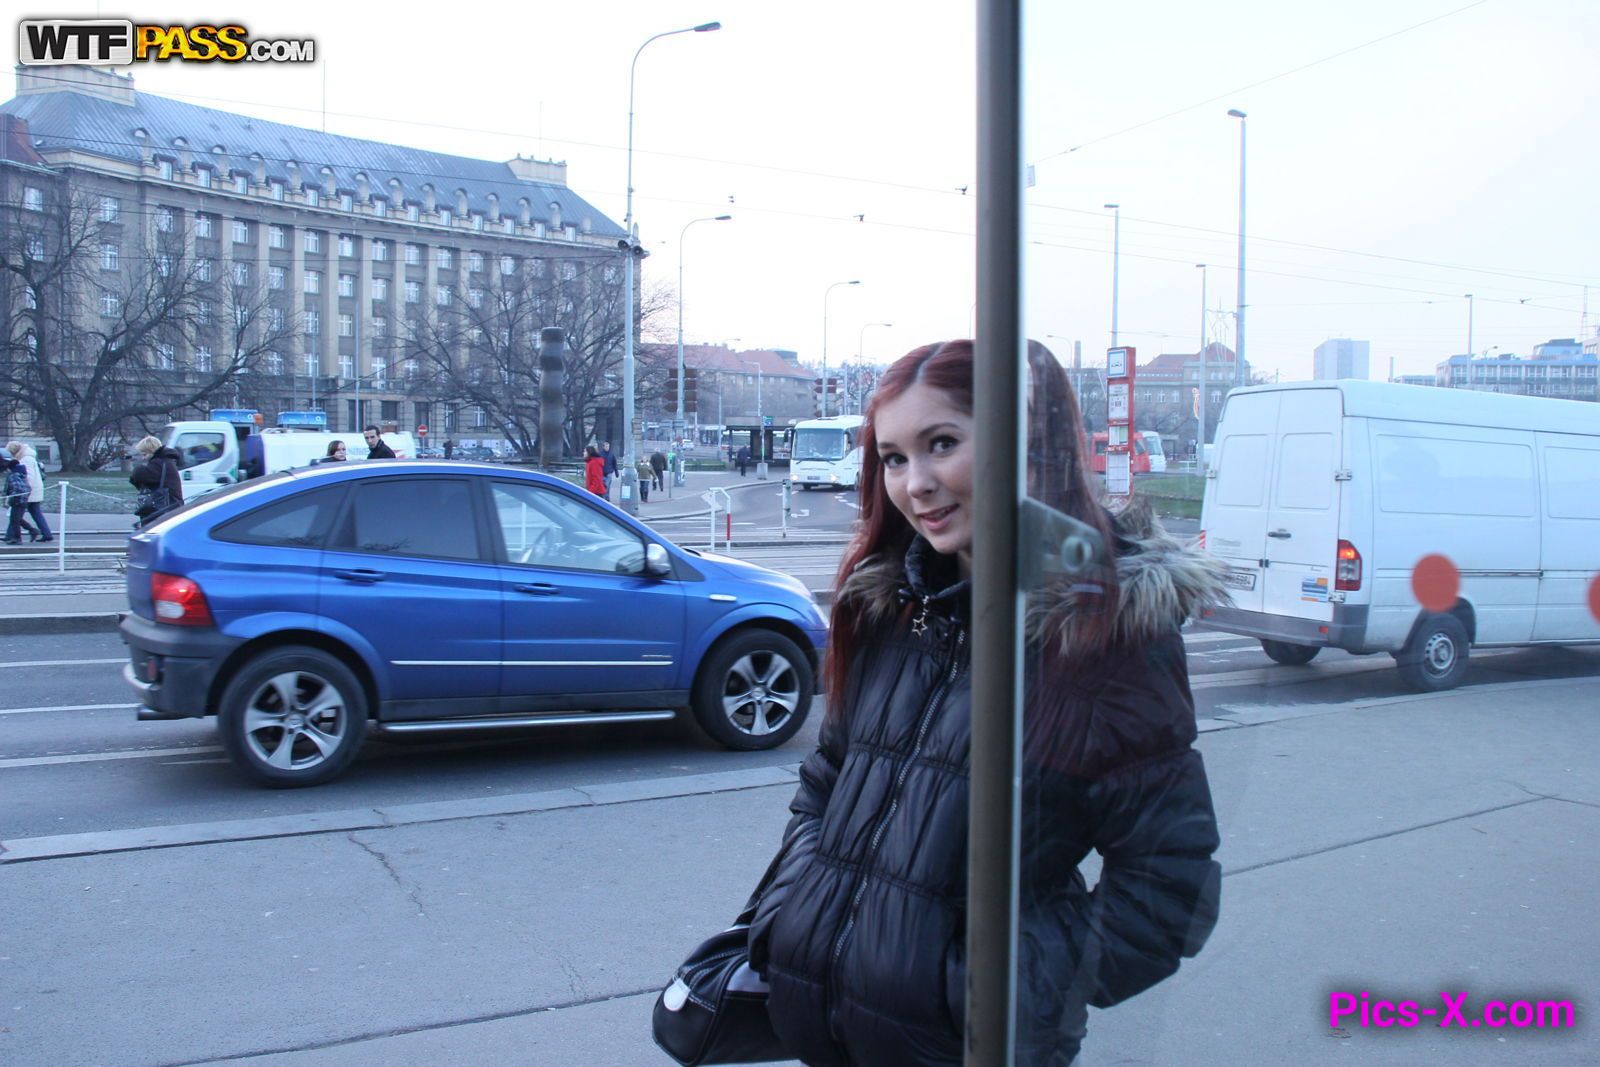 Real sex with a slutty redhead - Public Sex Adventures - Image 1